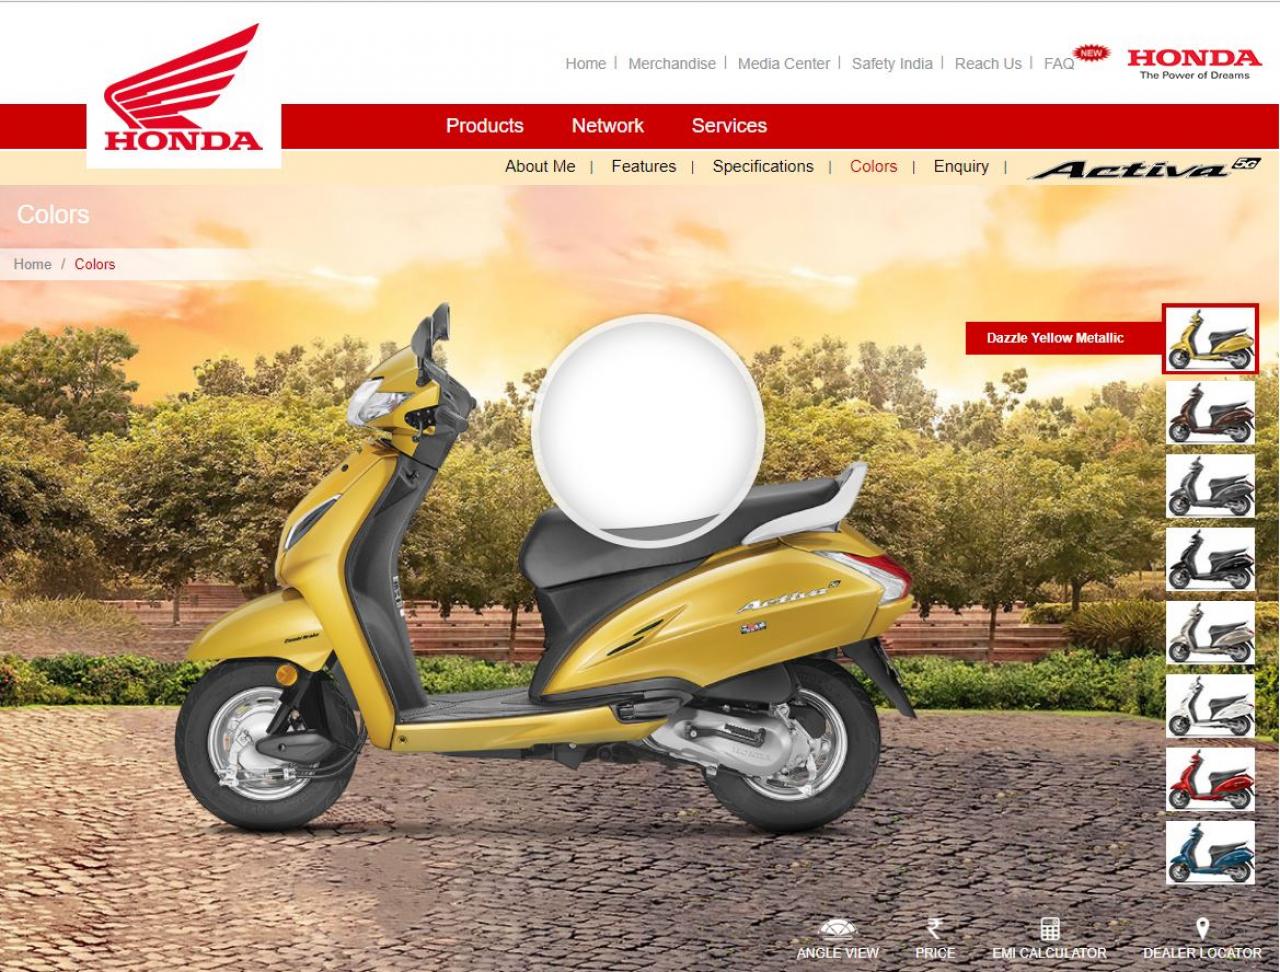 Honda Activa 5G listed on website. Priced at Rs. 52,460 | Team-BHP